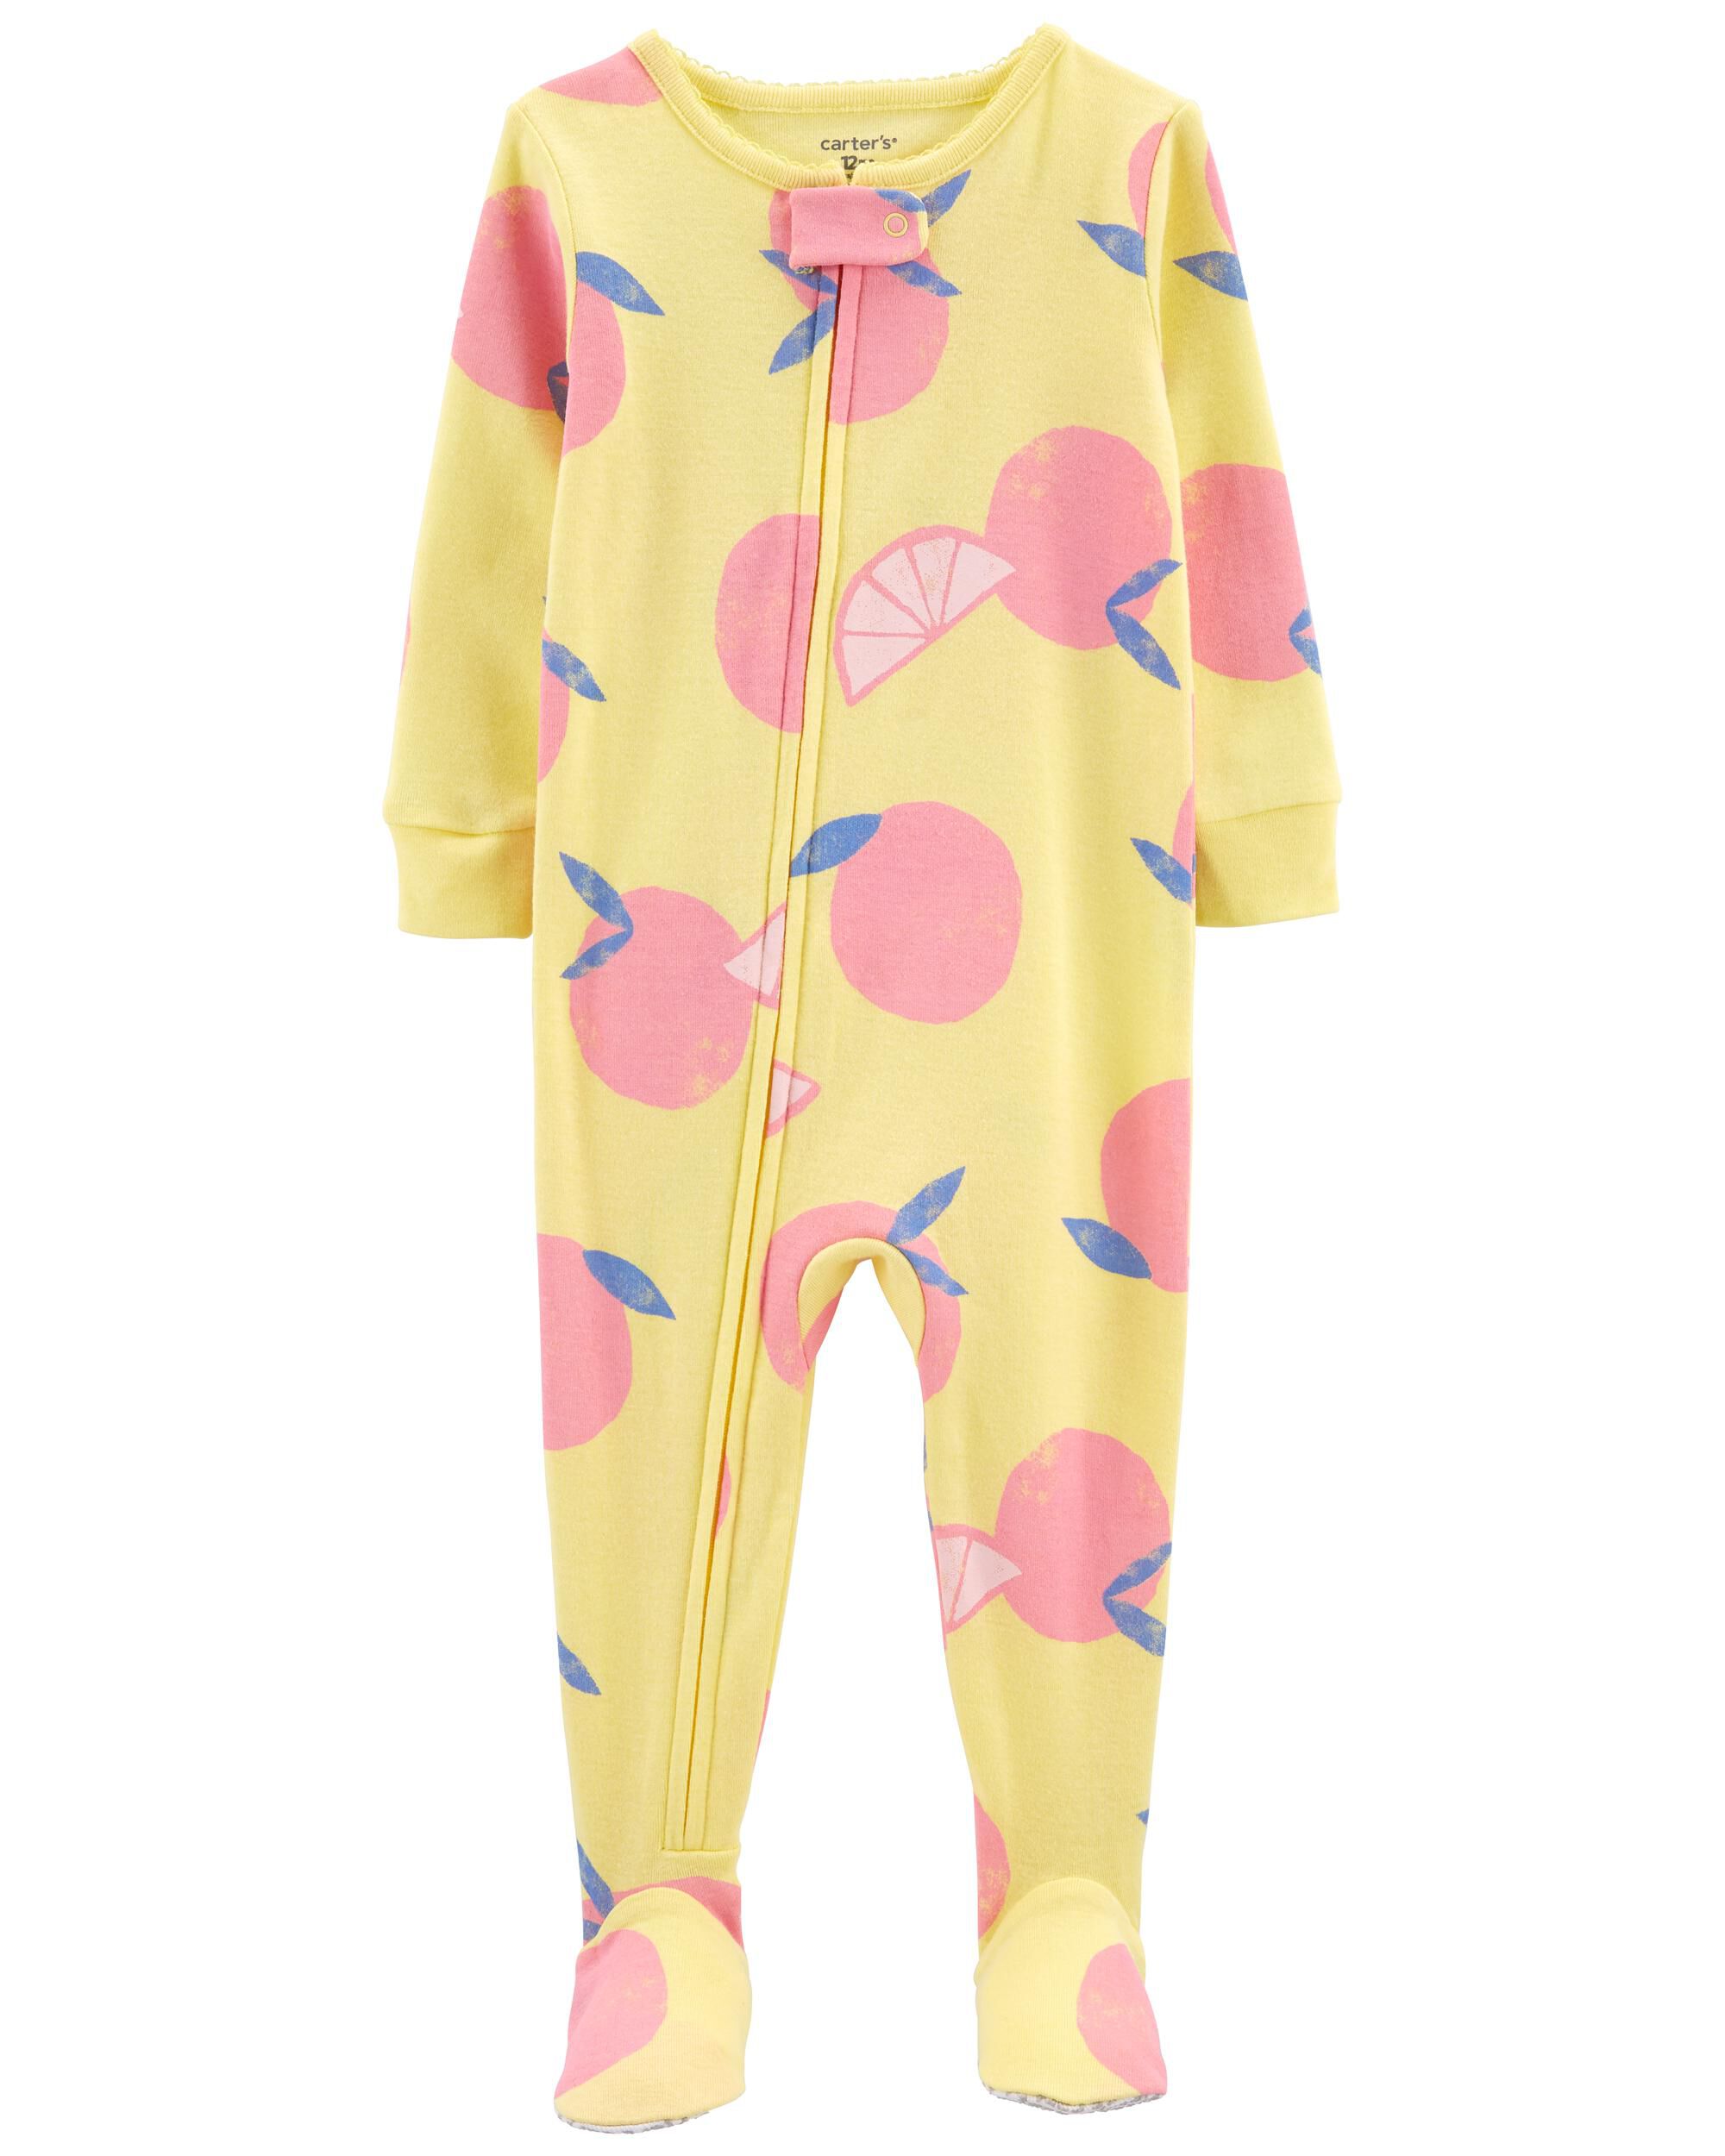 Details about   Carter’s Girl's Fleece Footed One Piece Pajamas Best Sister Size 18M or 24M 